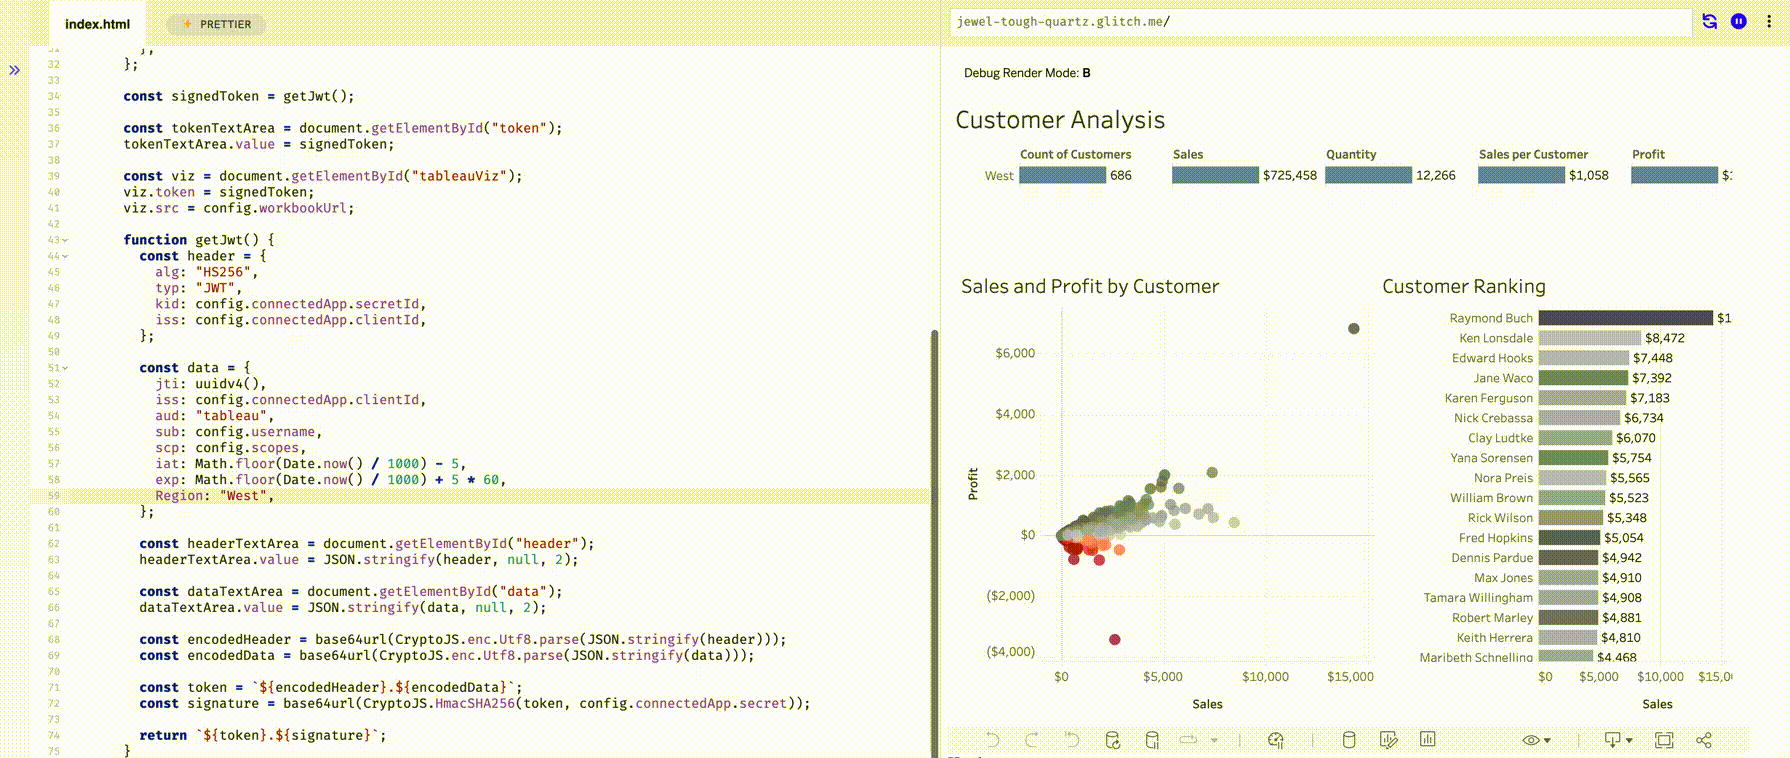 User uses User Attribute Functions to look at the number of customers in different regions 